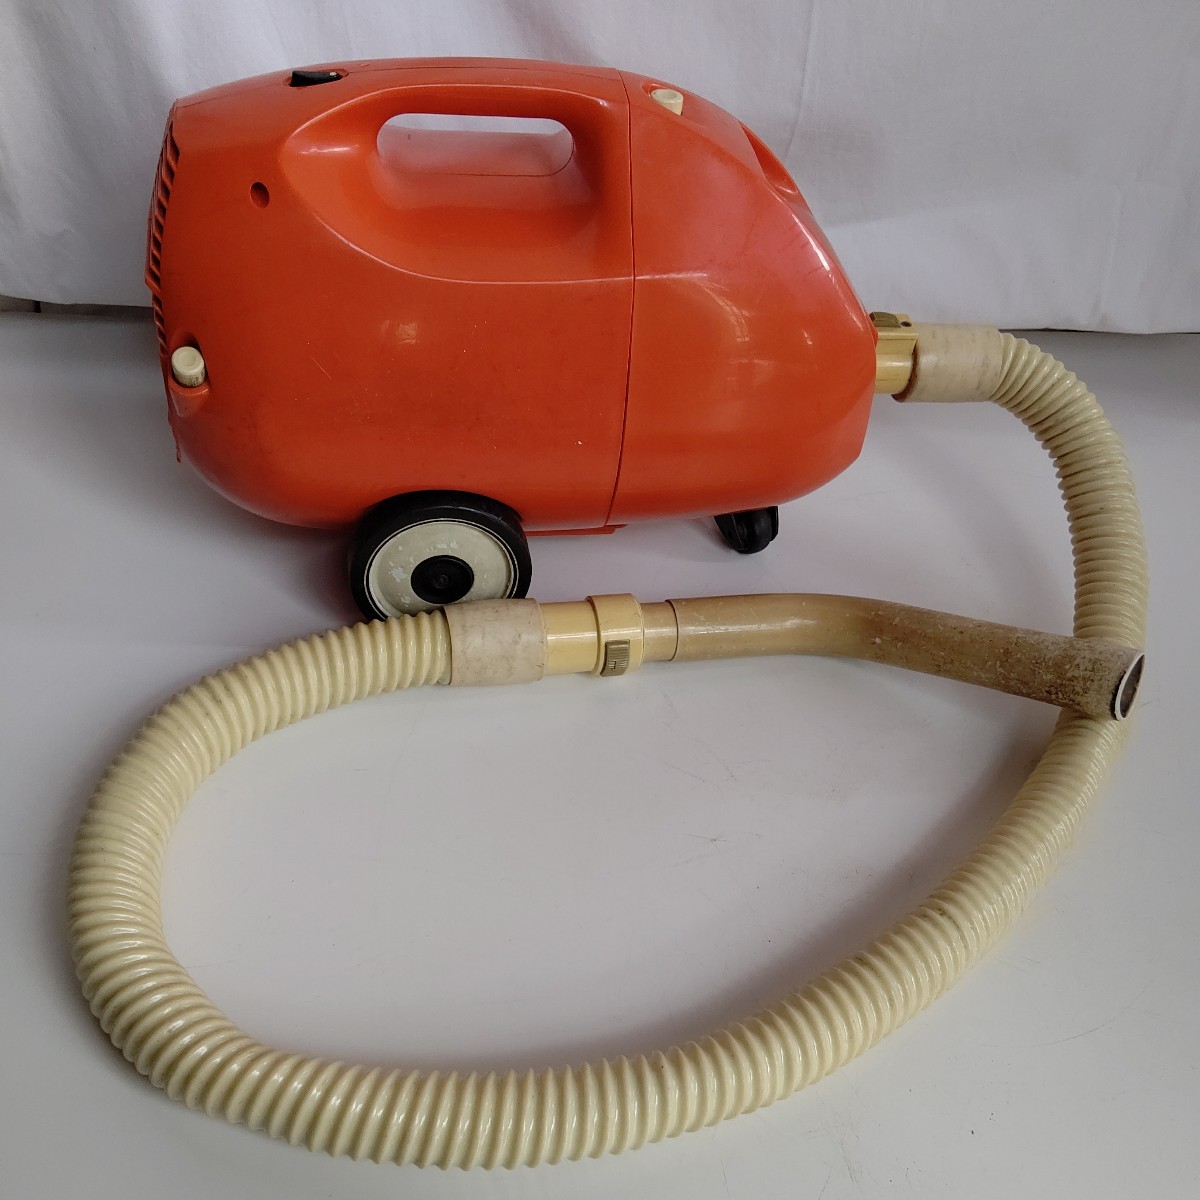  that time thing T character . included . equipped! Showa Retro actual work goods HITACHI vacuum cleaner Hitachi 6550 type missed design orange color absorption power eminent!